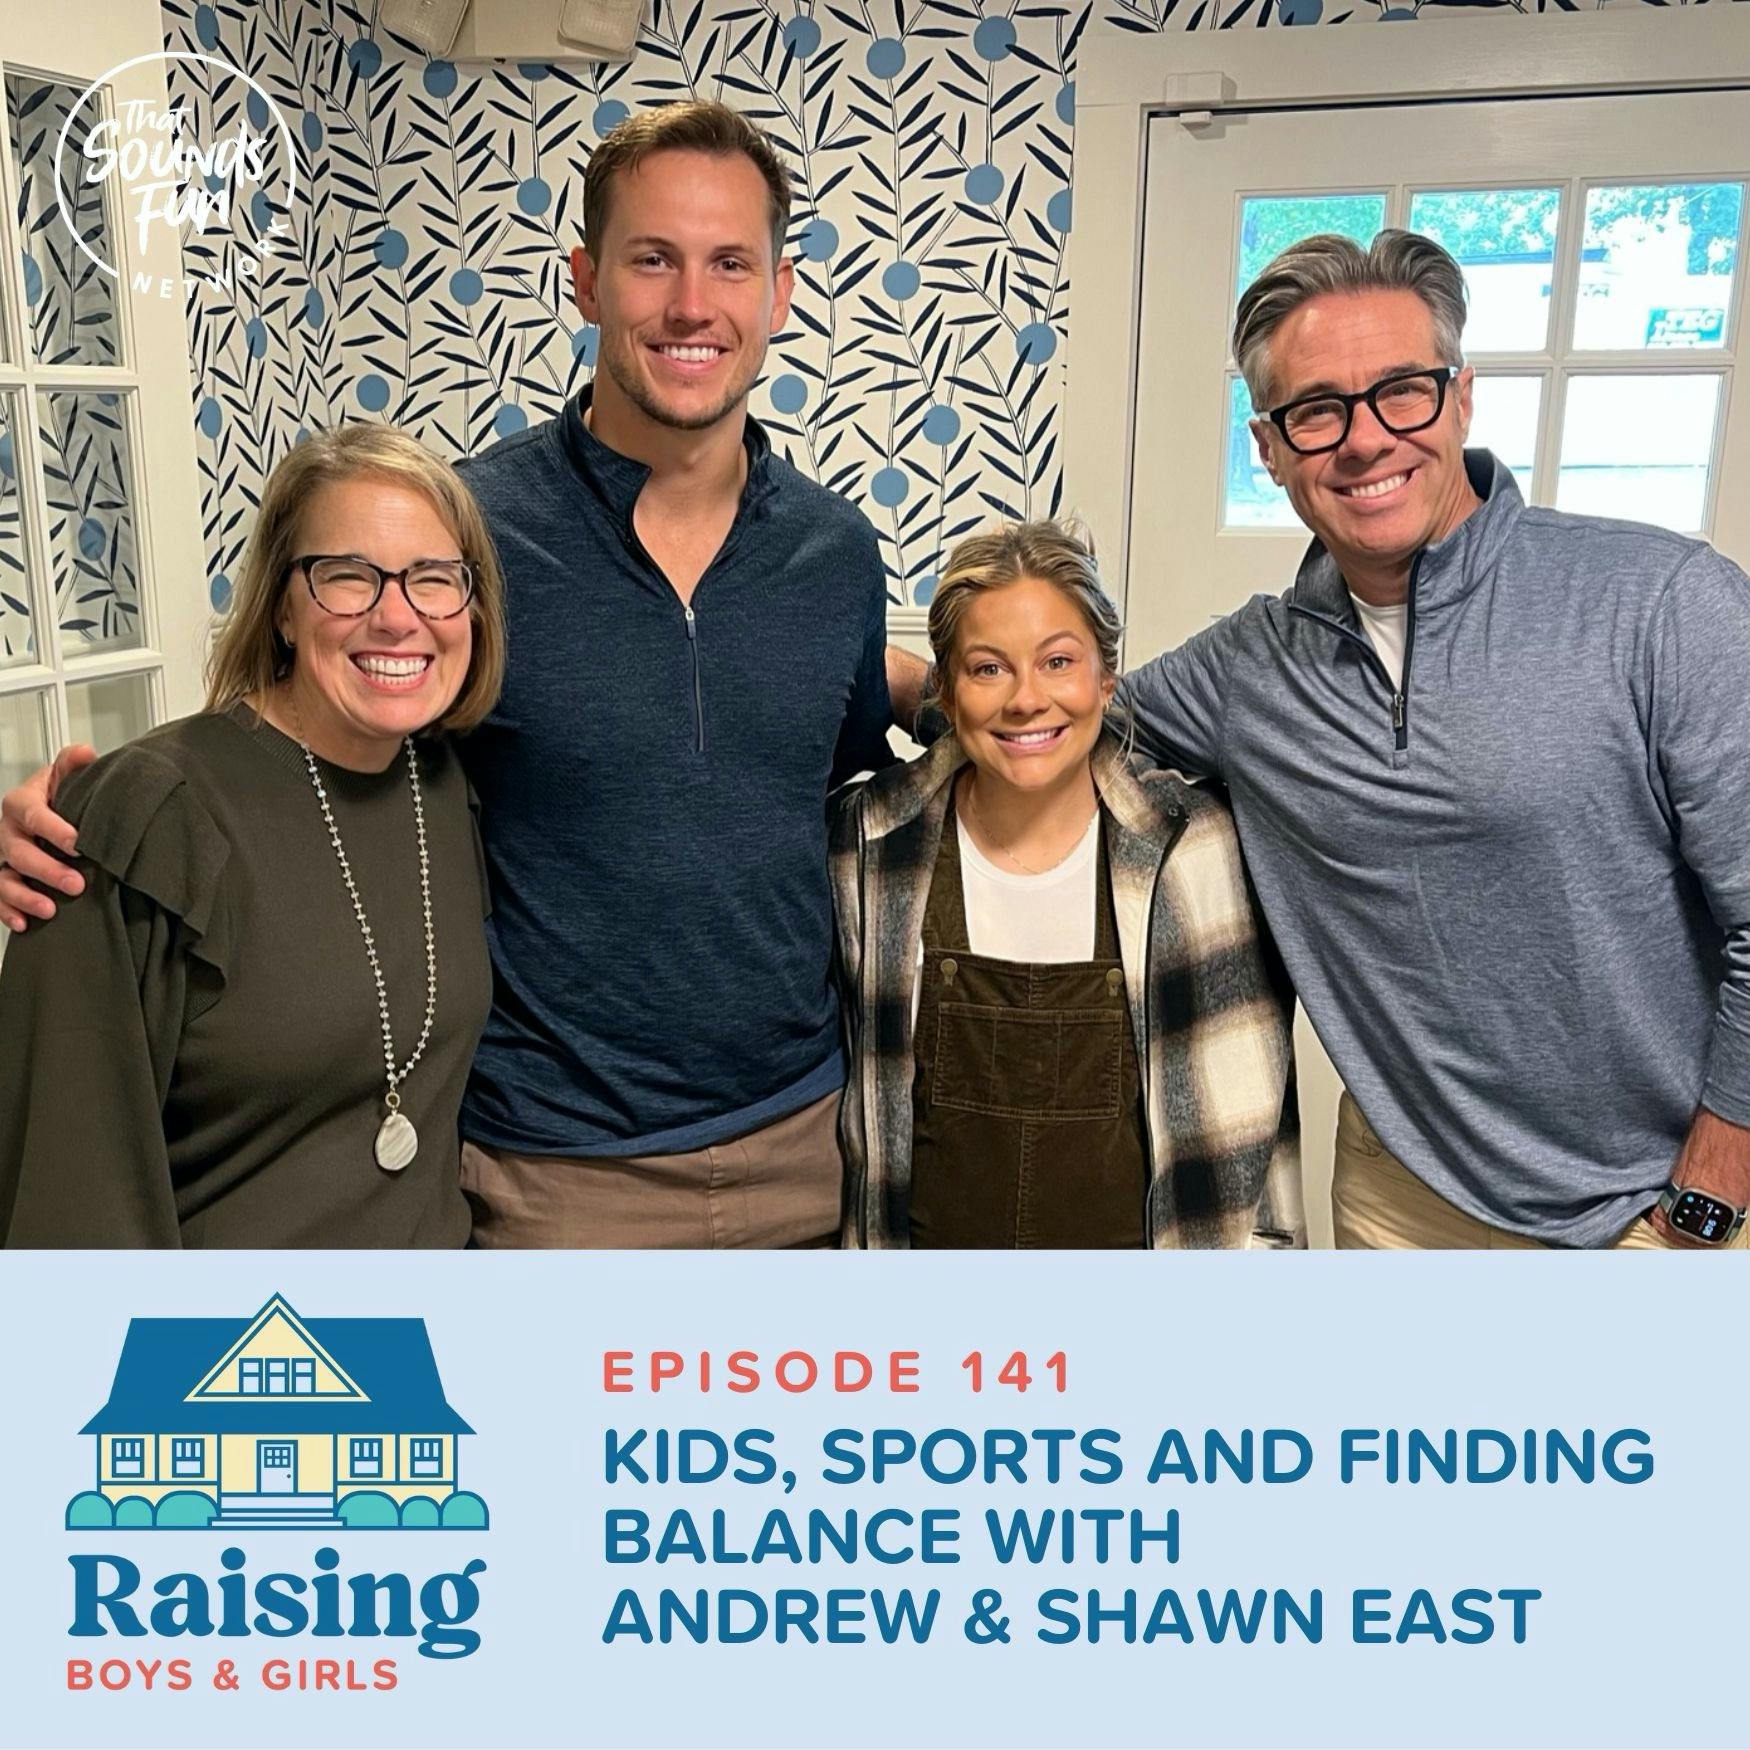 Episode 141: Kids, Sports, and Finding Balance with Andrew & Shawn East